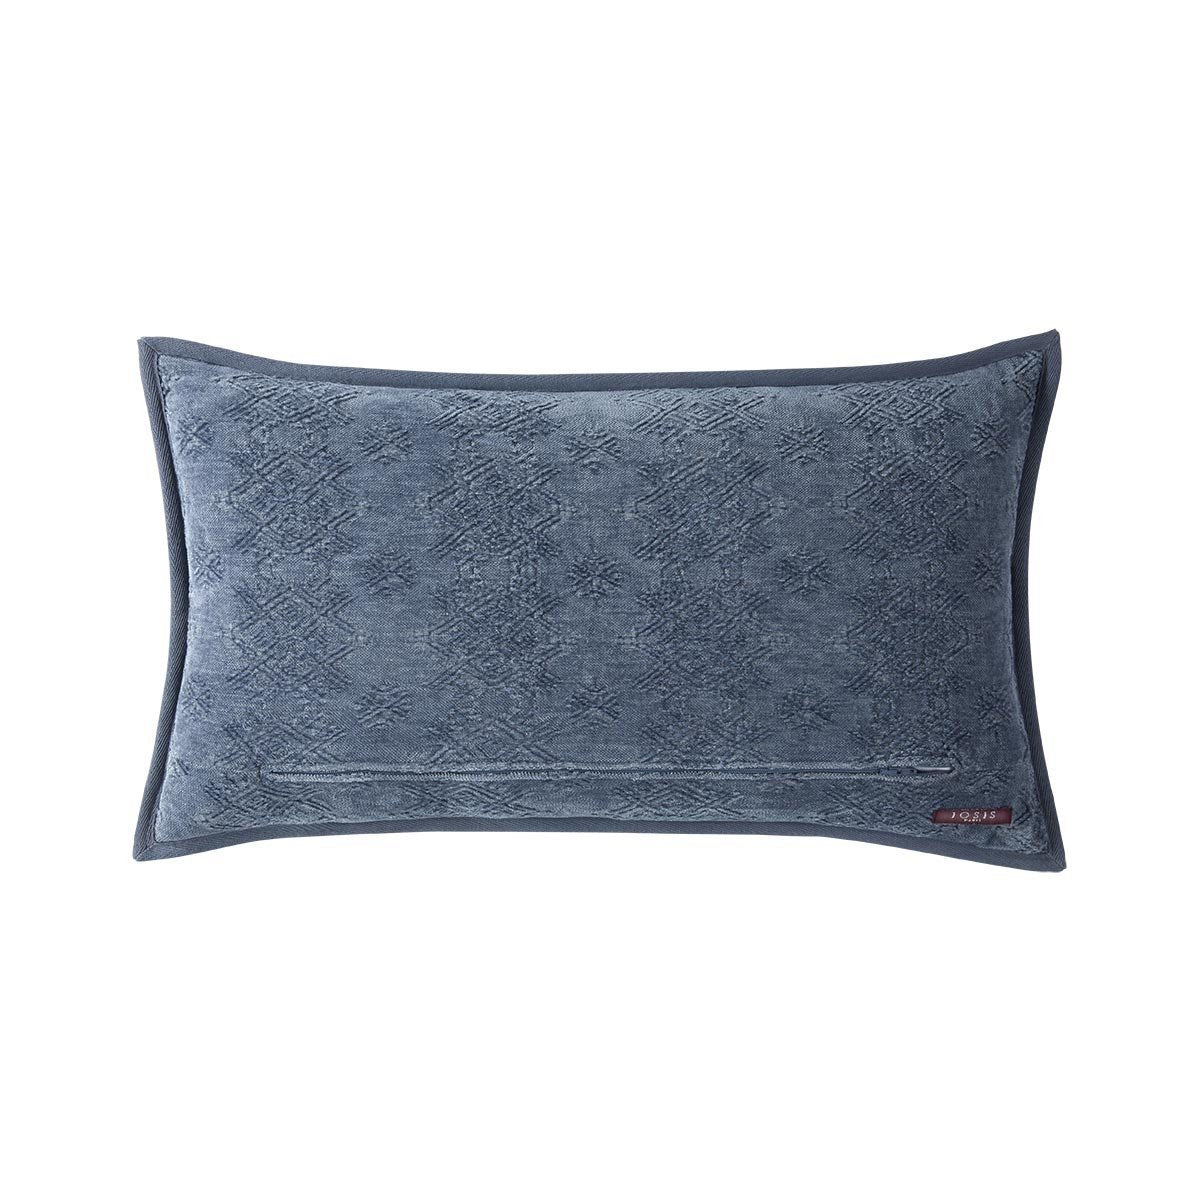 Fig Linens - Syracuse Zinc Lumbar Pillow by Iosis - Back